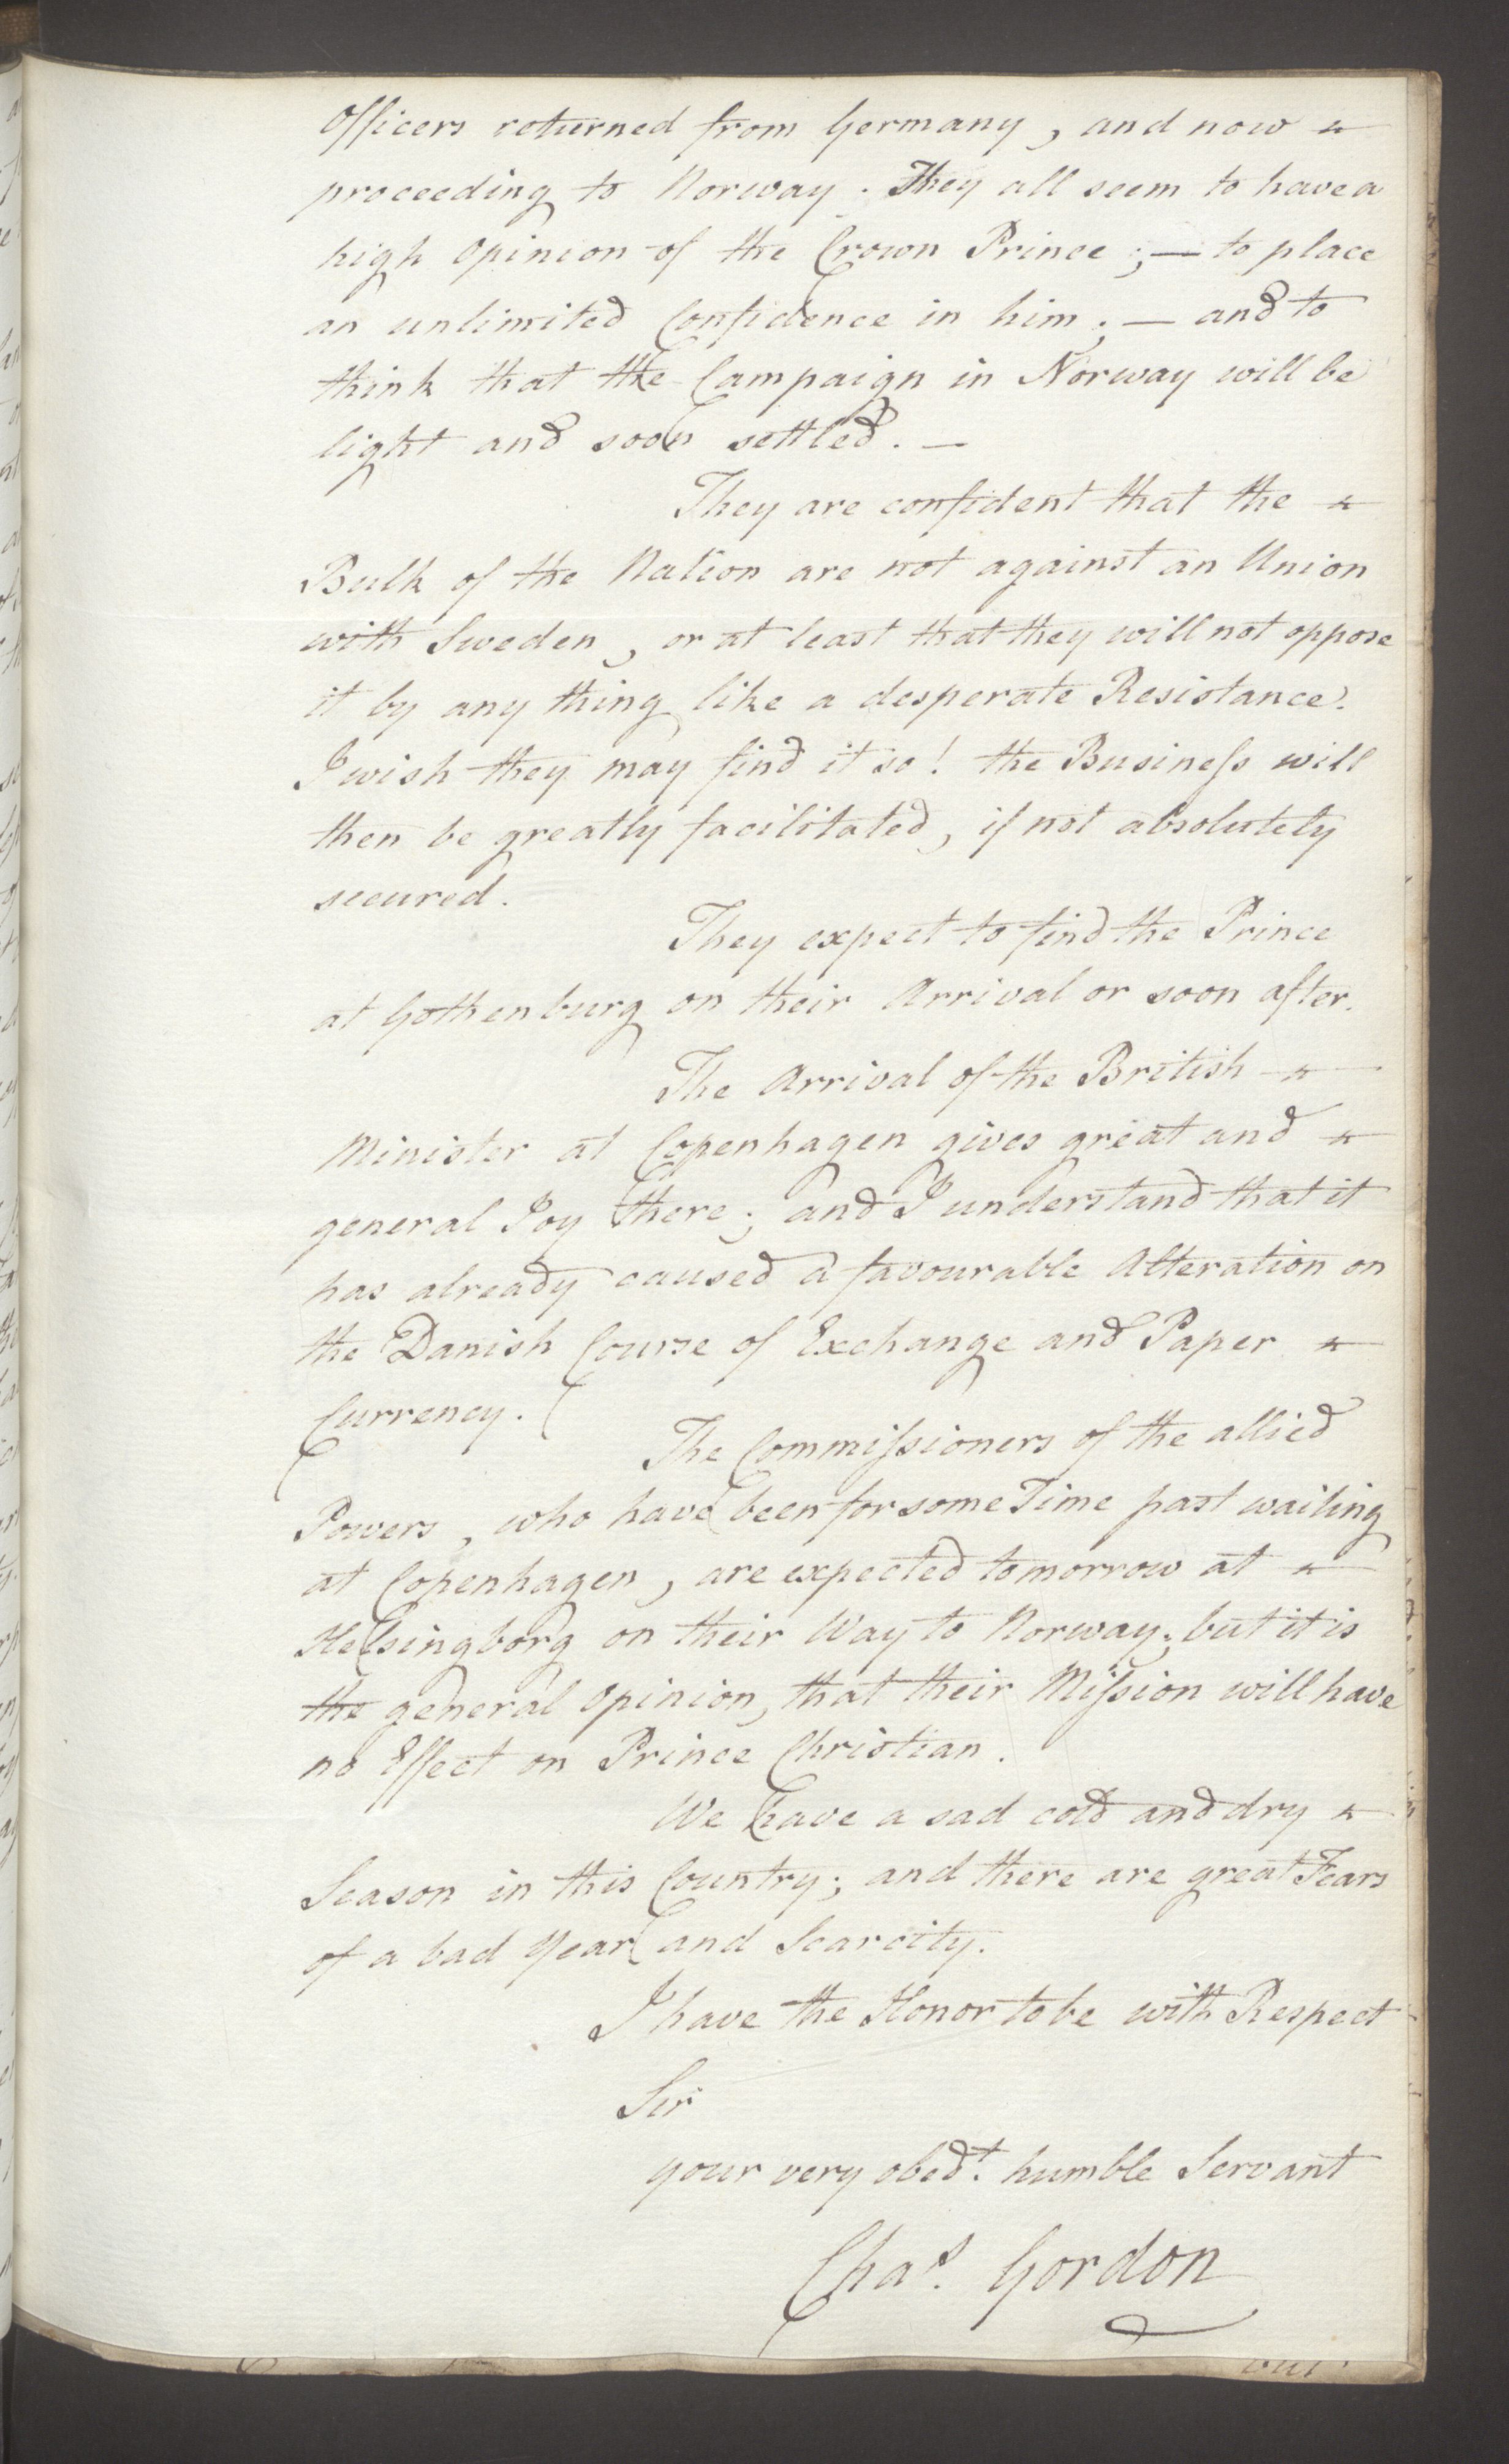 Foreign Office*, UKA/-/FO 38/16: Sir C. Gordon. Reports from Malmö, Jonkoping, and Helsingborg, 1814, s. 65